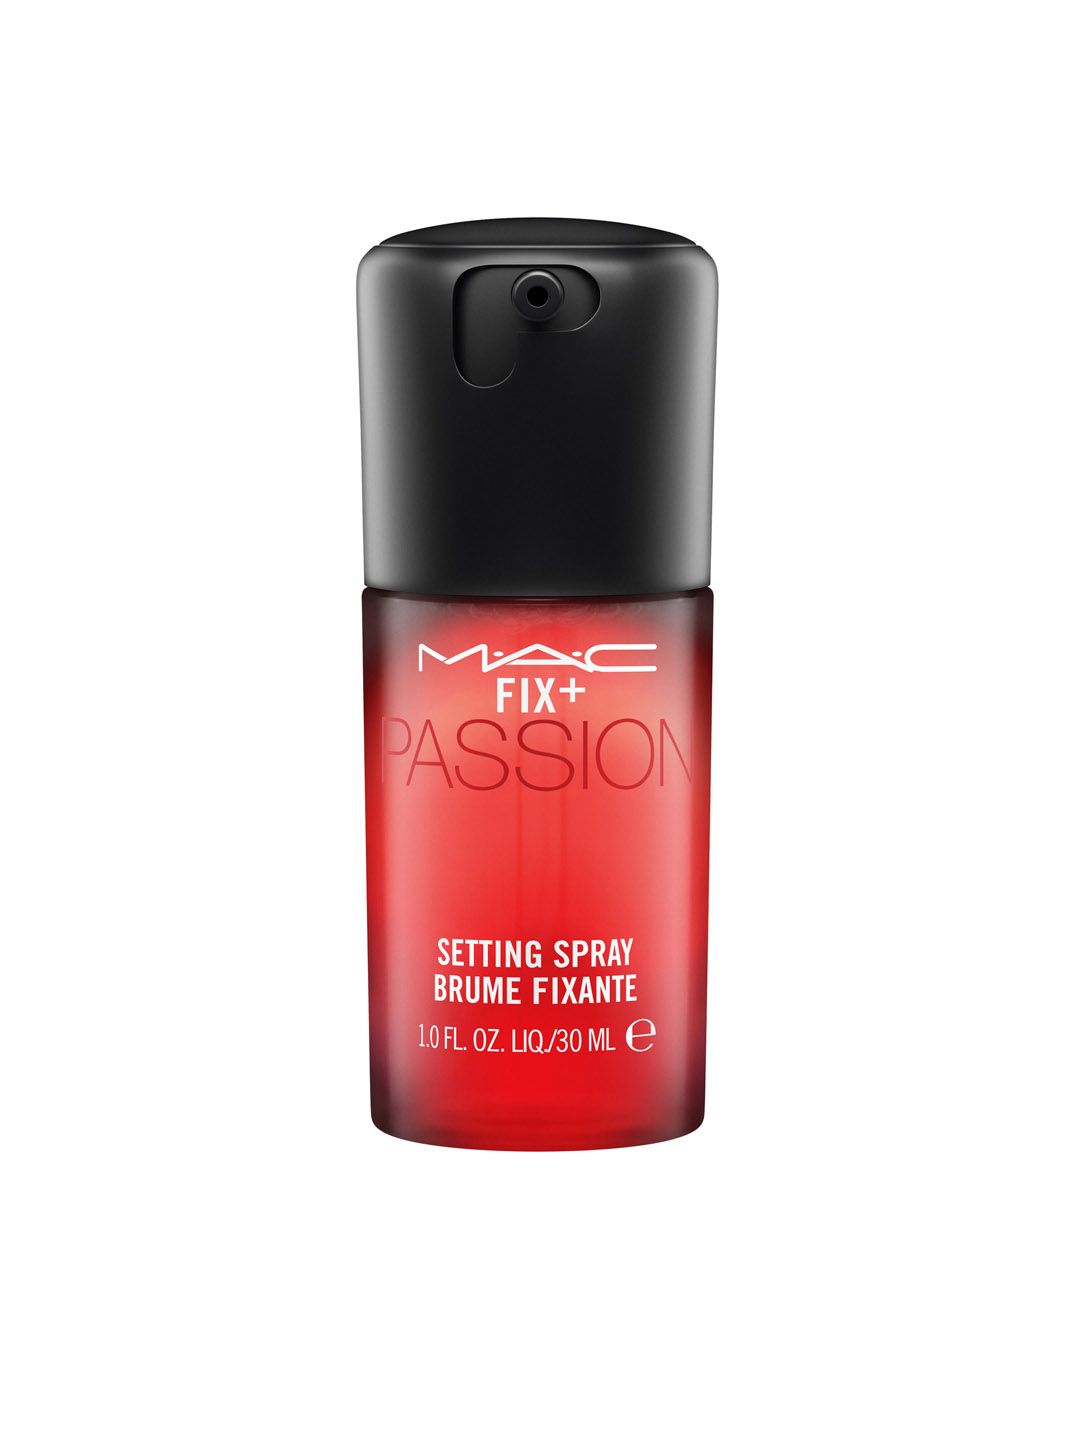 M.A.C Women Fix+Passion Setting Spray 30 ml Price in India